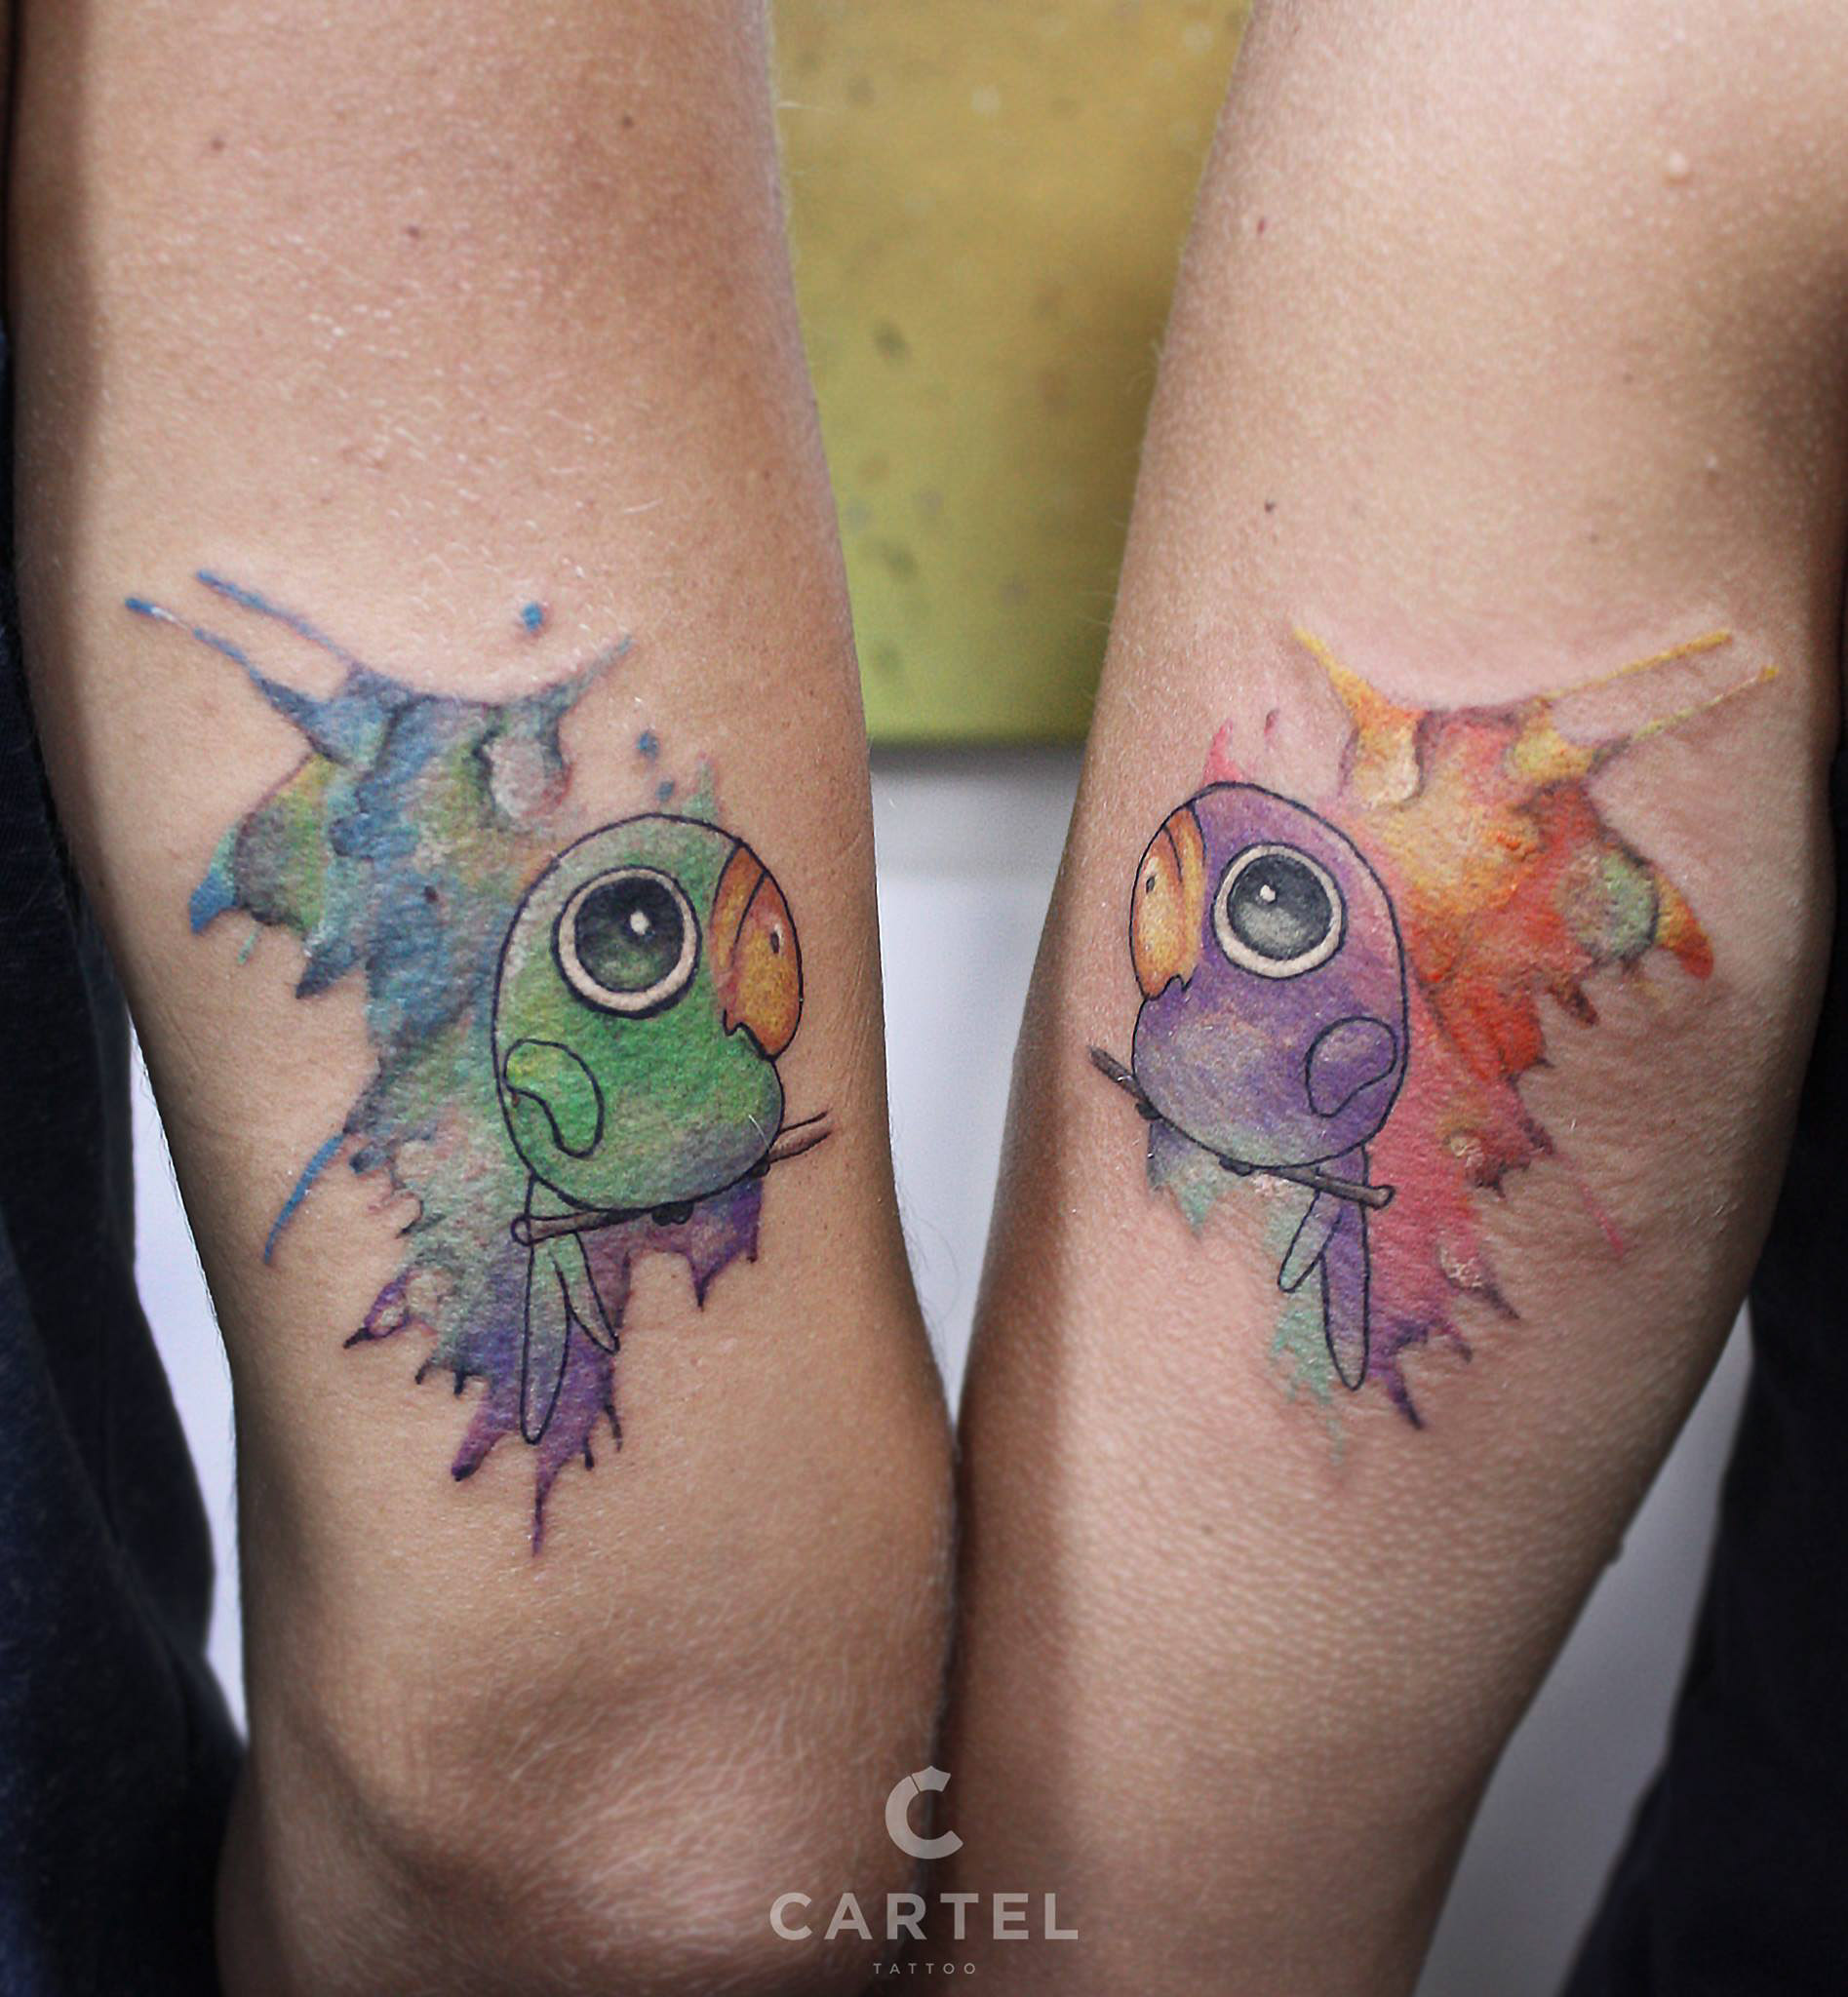 Tattoo Artist Captures the Carefree Fluidity of Watercolor Paint in  Colorful Tattoos | Watercolor bird tattoo, Hummingbird tattoo, Hummingbird  tattoo meaning